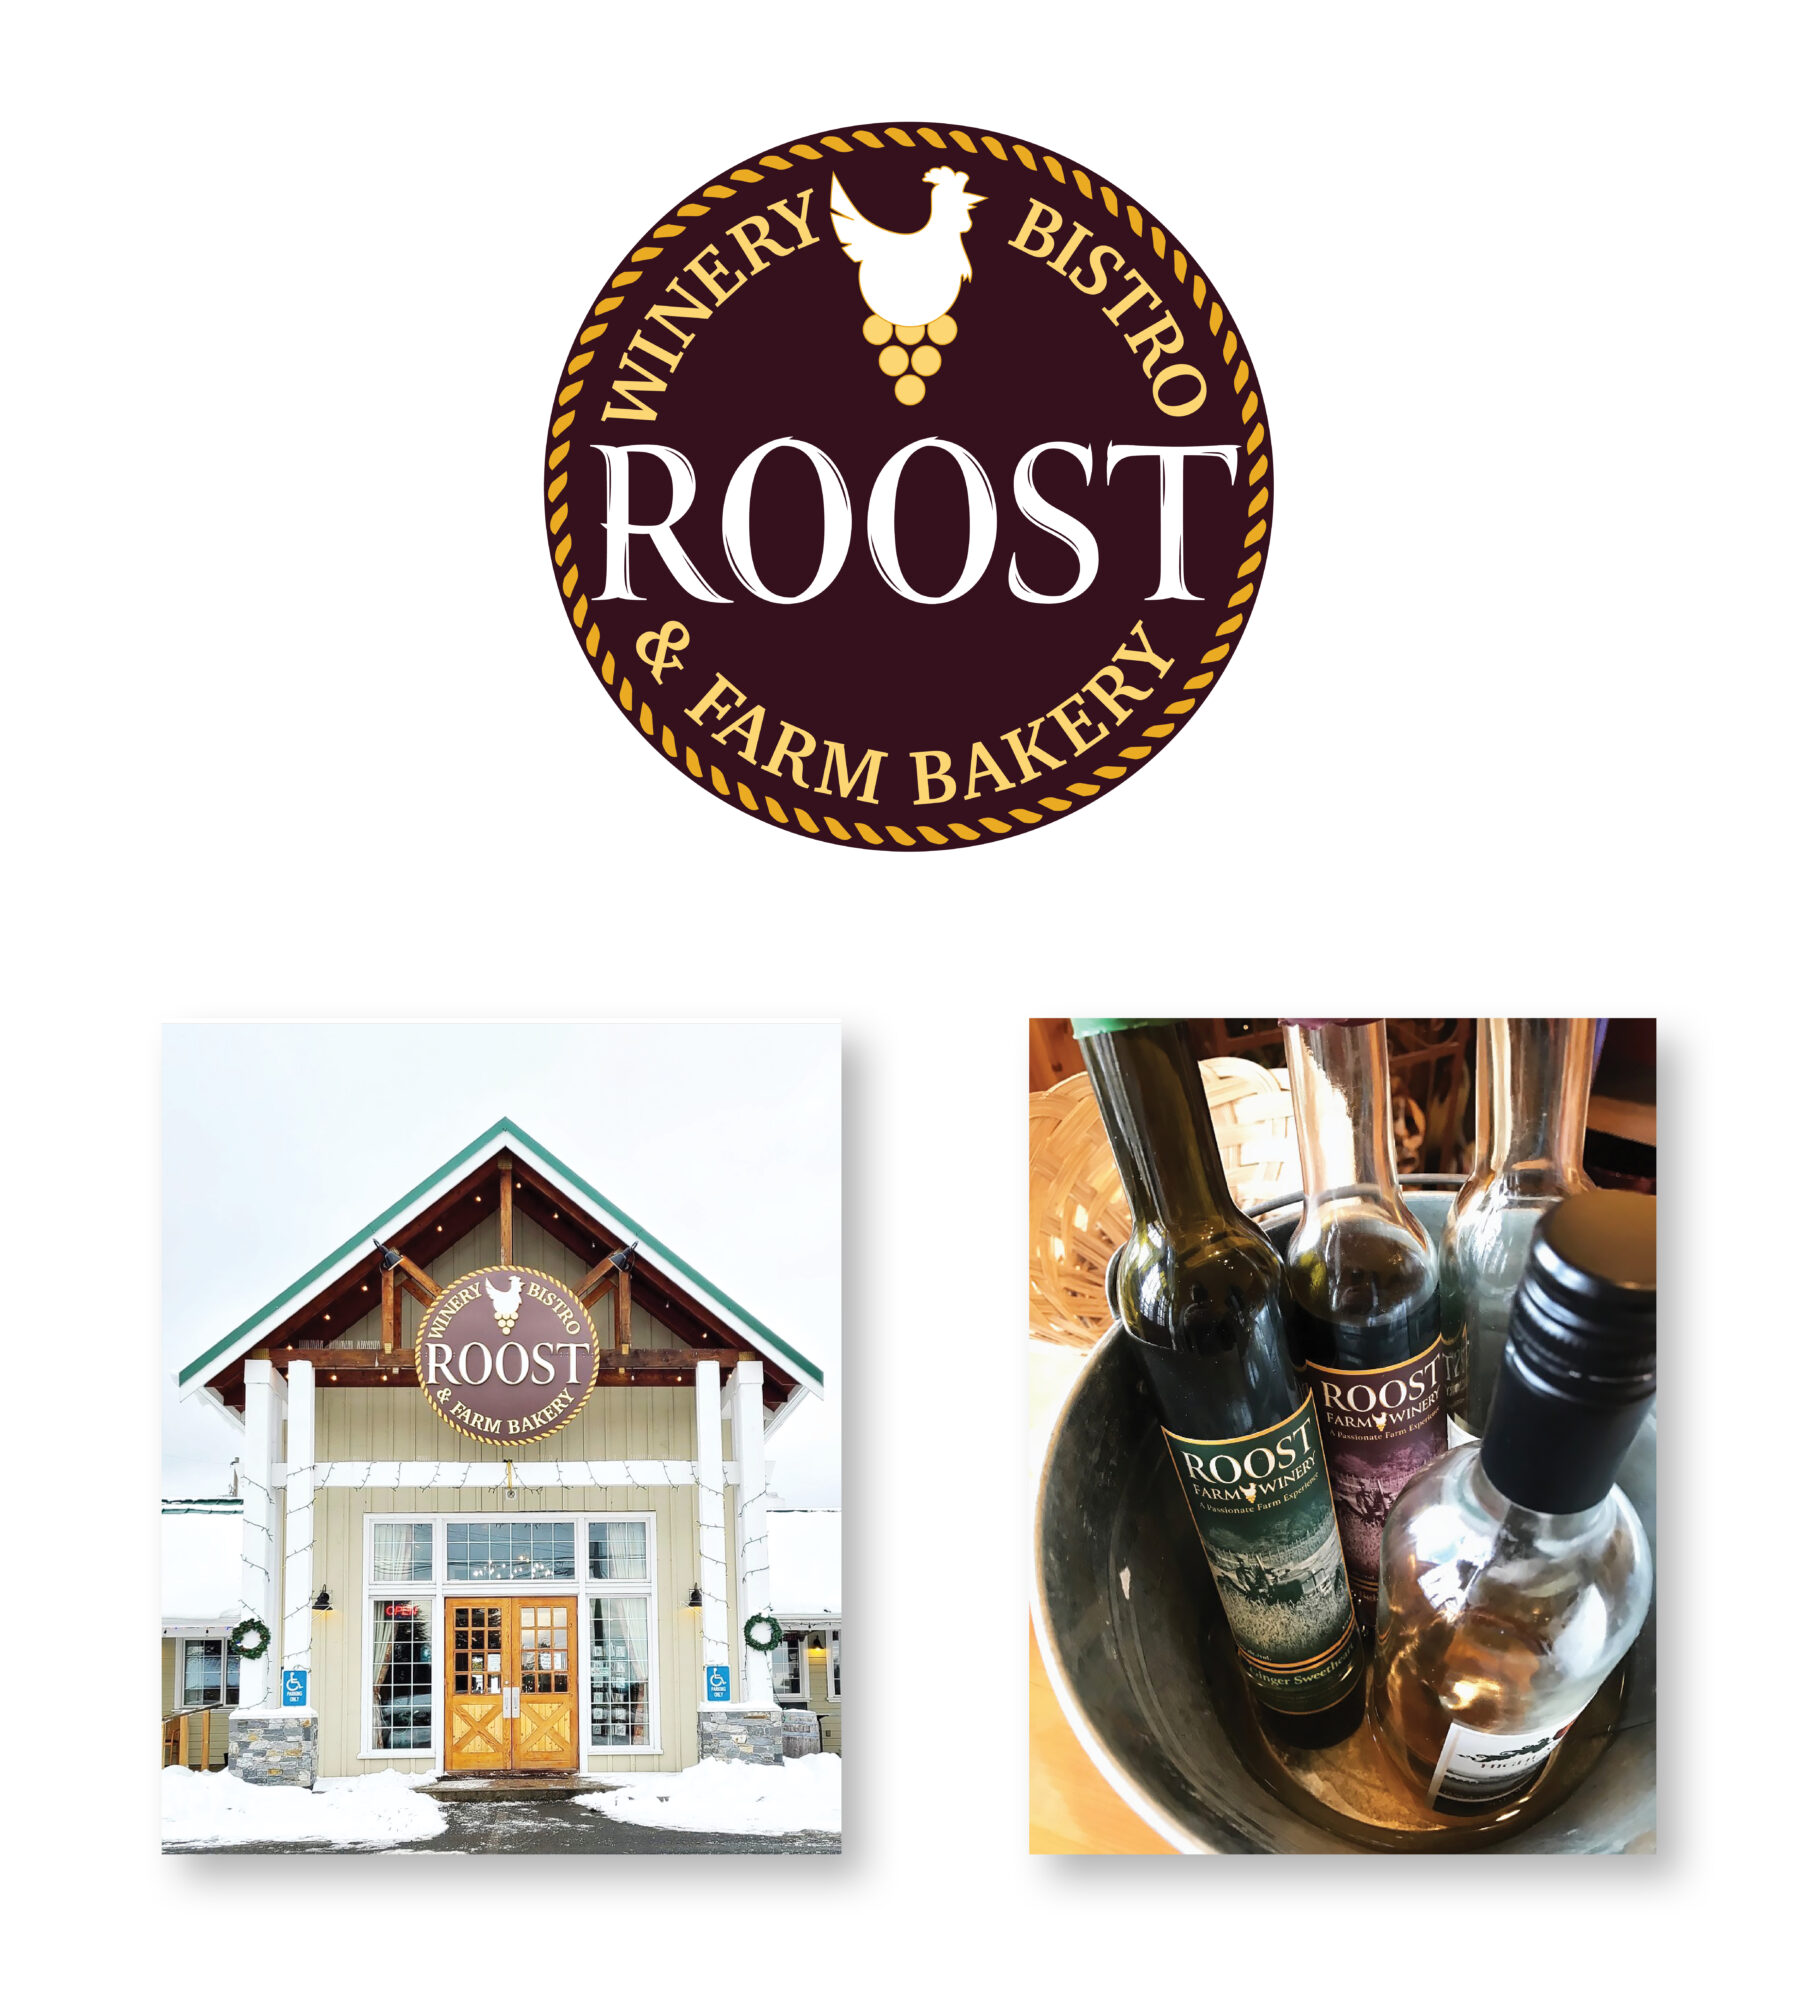 The Roost Winery Bistro & Farm Bakery - Logo